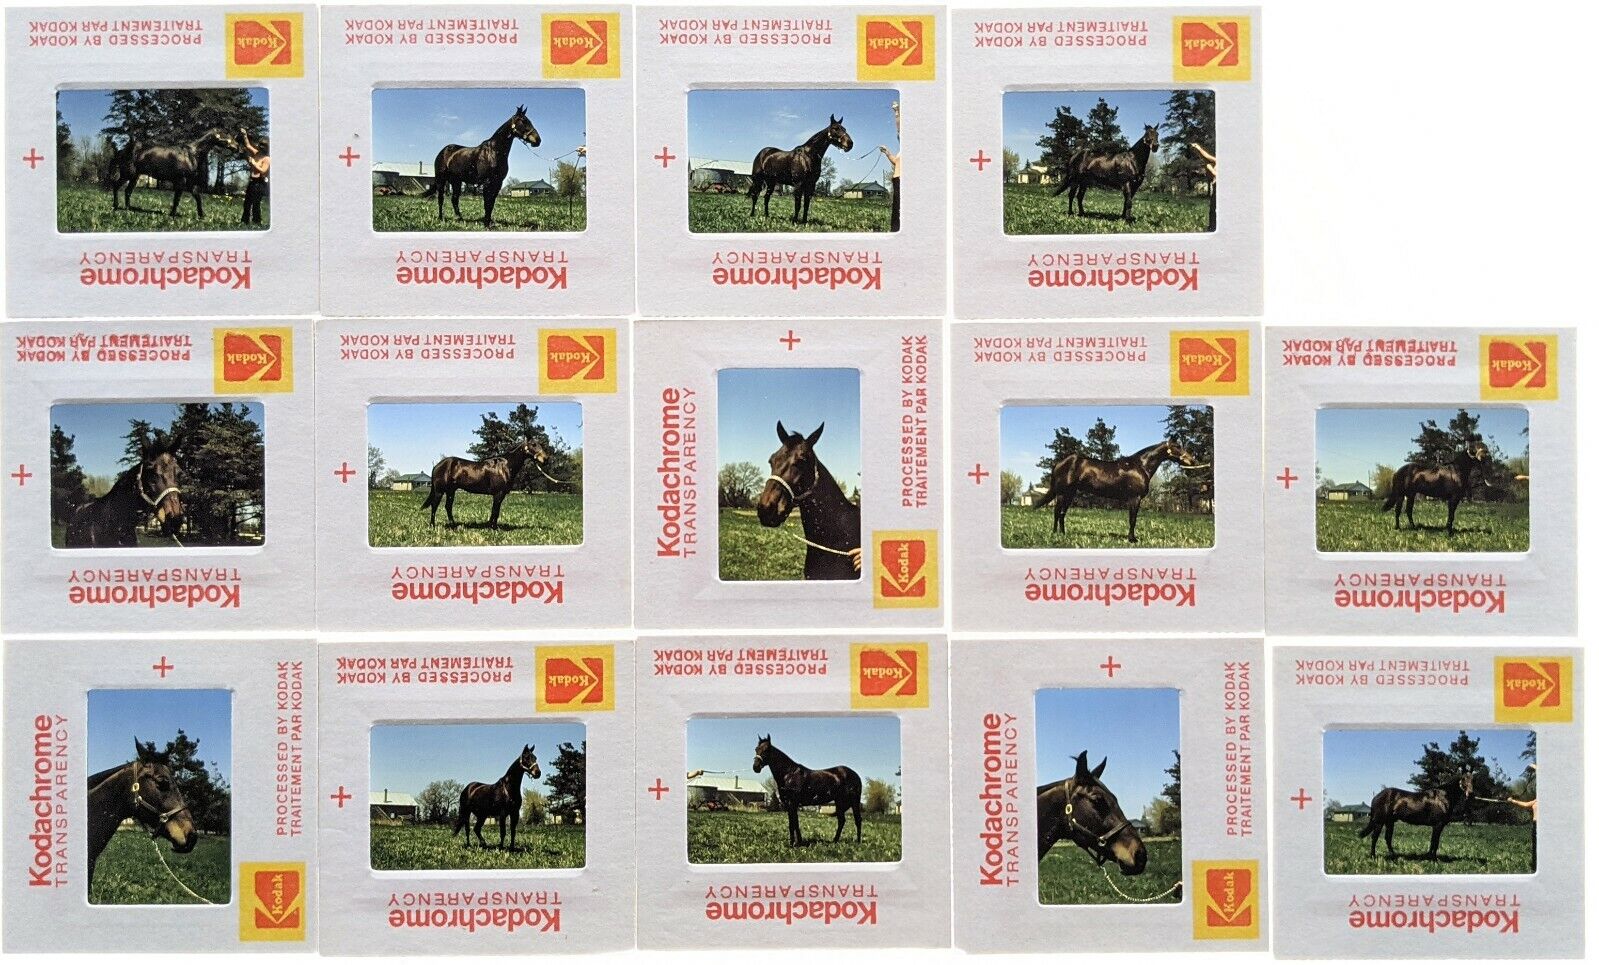 Vintage Kodachrome slides of prize-winning horse - Quincy\'s Giant, 1975